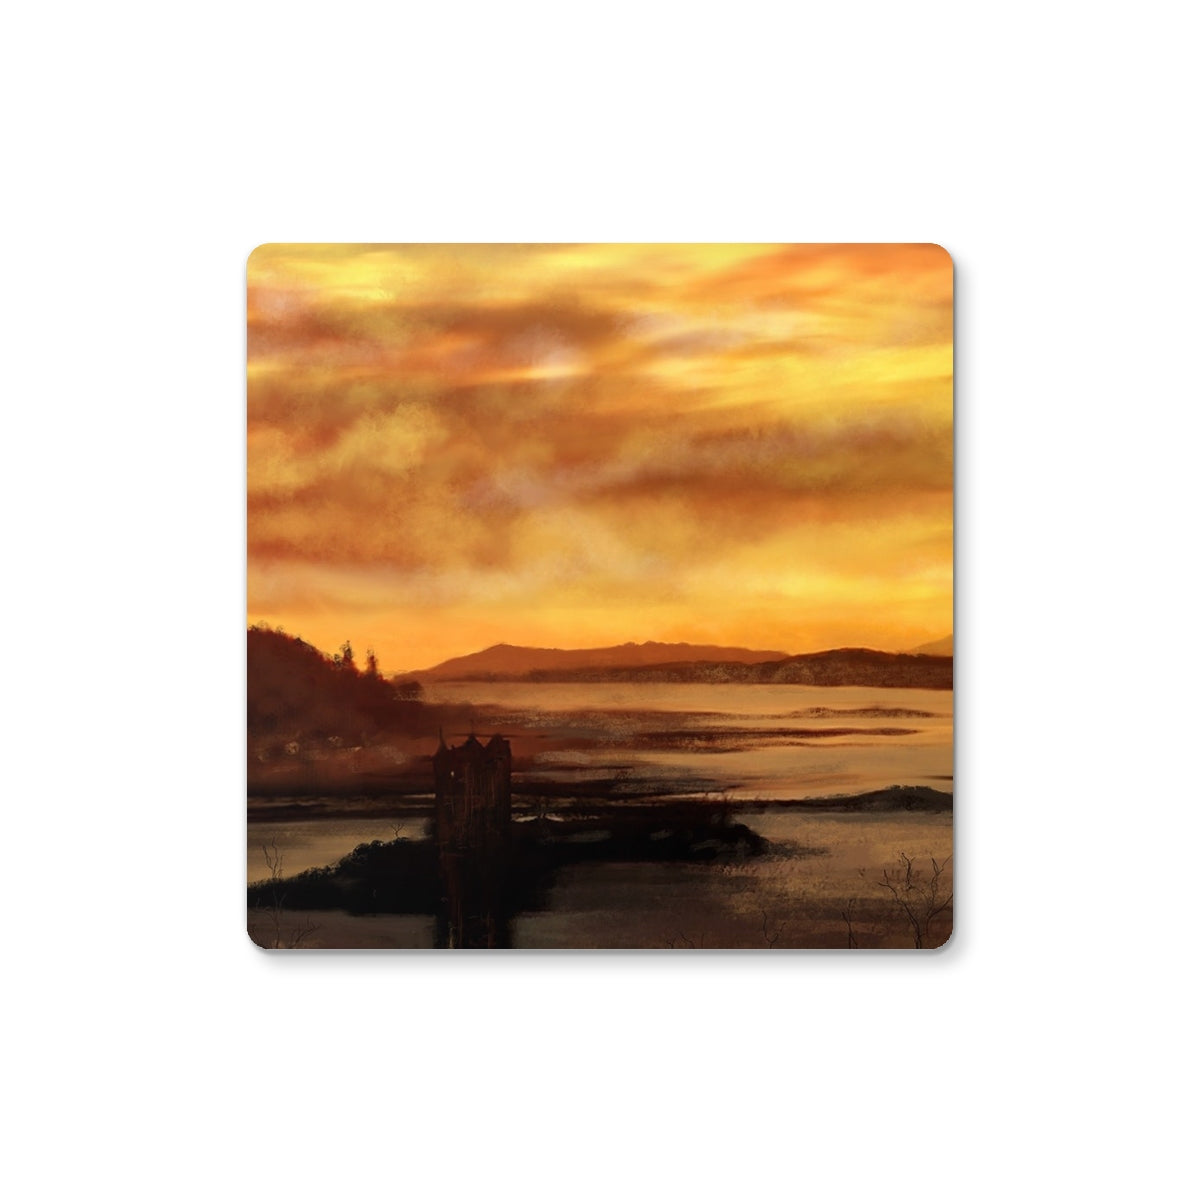 Castle Stalker Dusk Art Gifts Coaster-Coasters-Historic & Iconic Scotland Art Gallery-4 Coasters-Paintings, Prints, Homeware, Art Gifts From Scotland By Scottish Artist Kevin Hunter